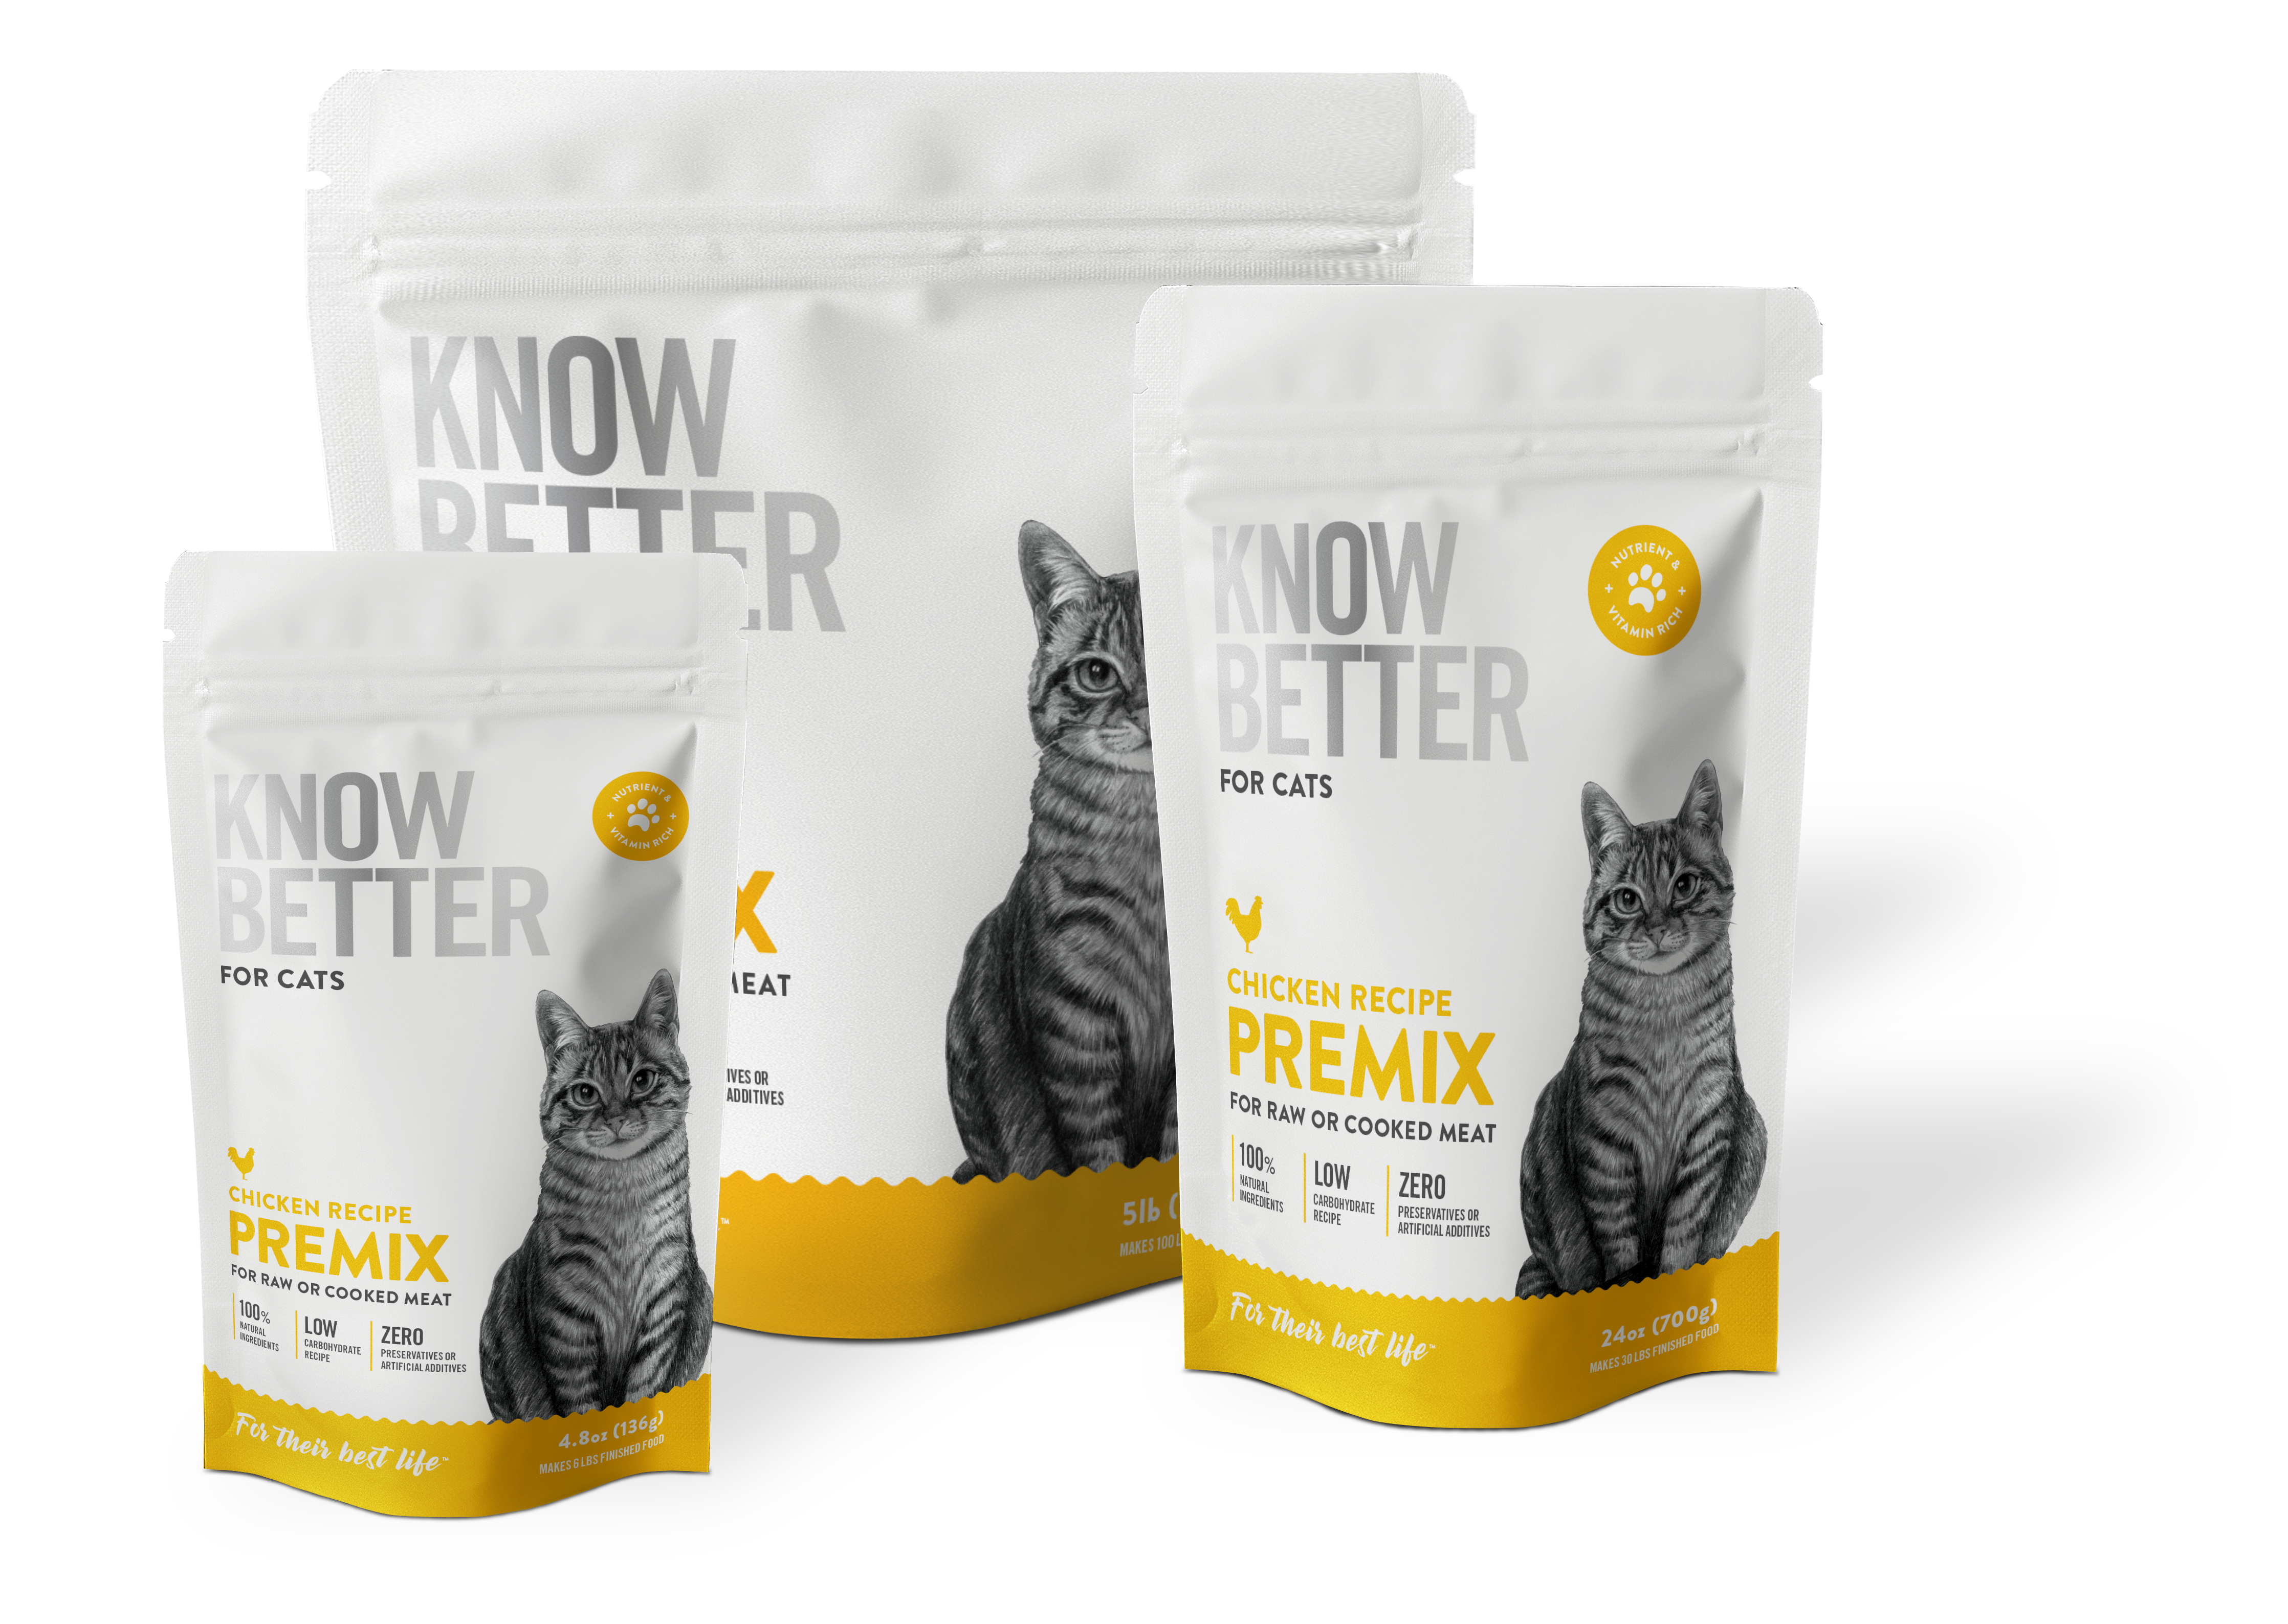 Know Better for Cats - Chicken Recipe - For making a healthy homemade cat food